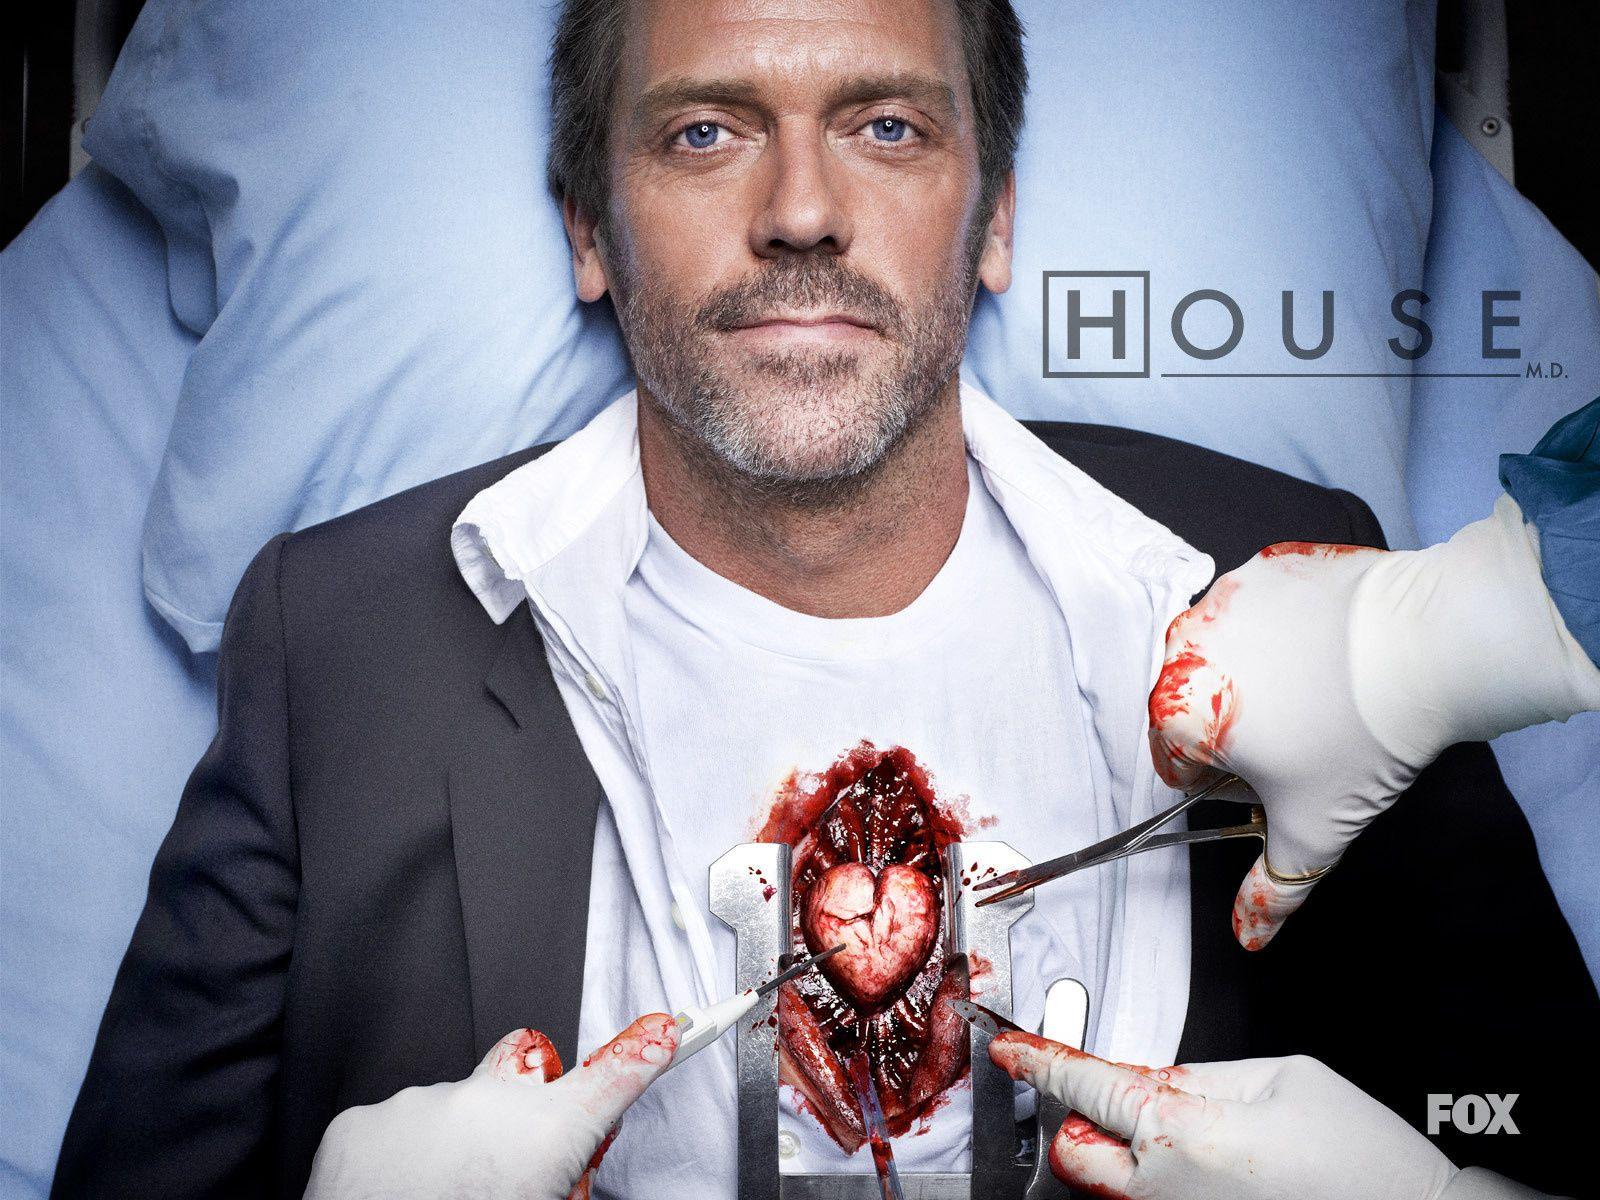 Wallpaper Gregory House, House m.d., hugh laurie, doctor house